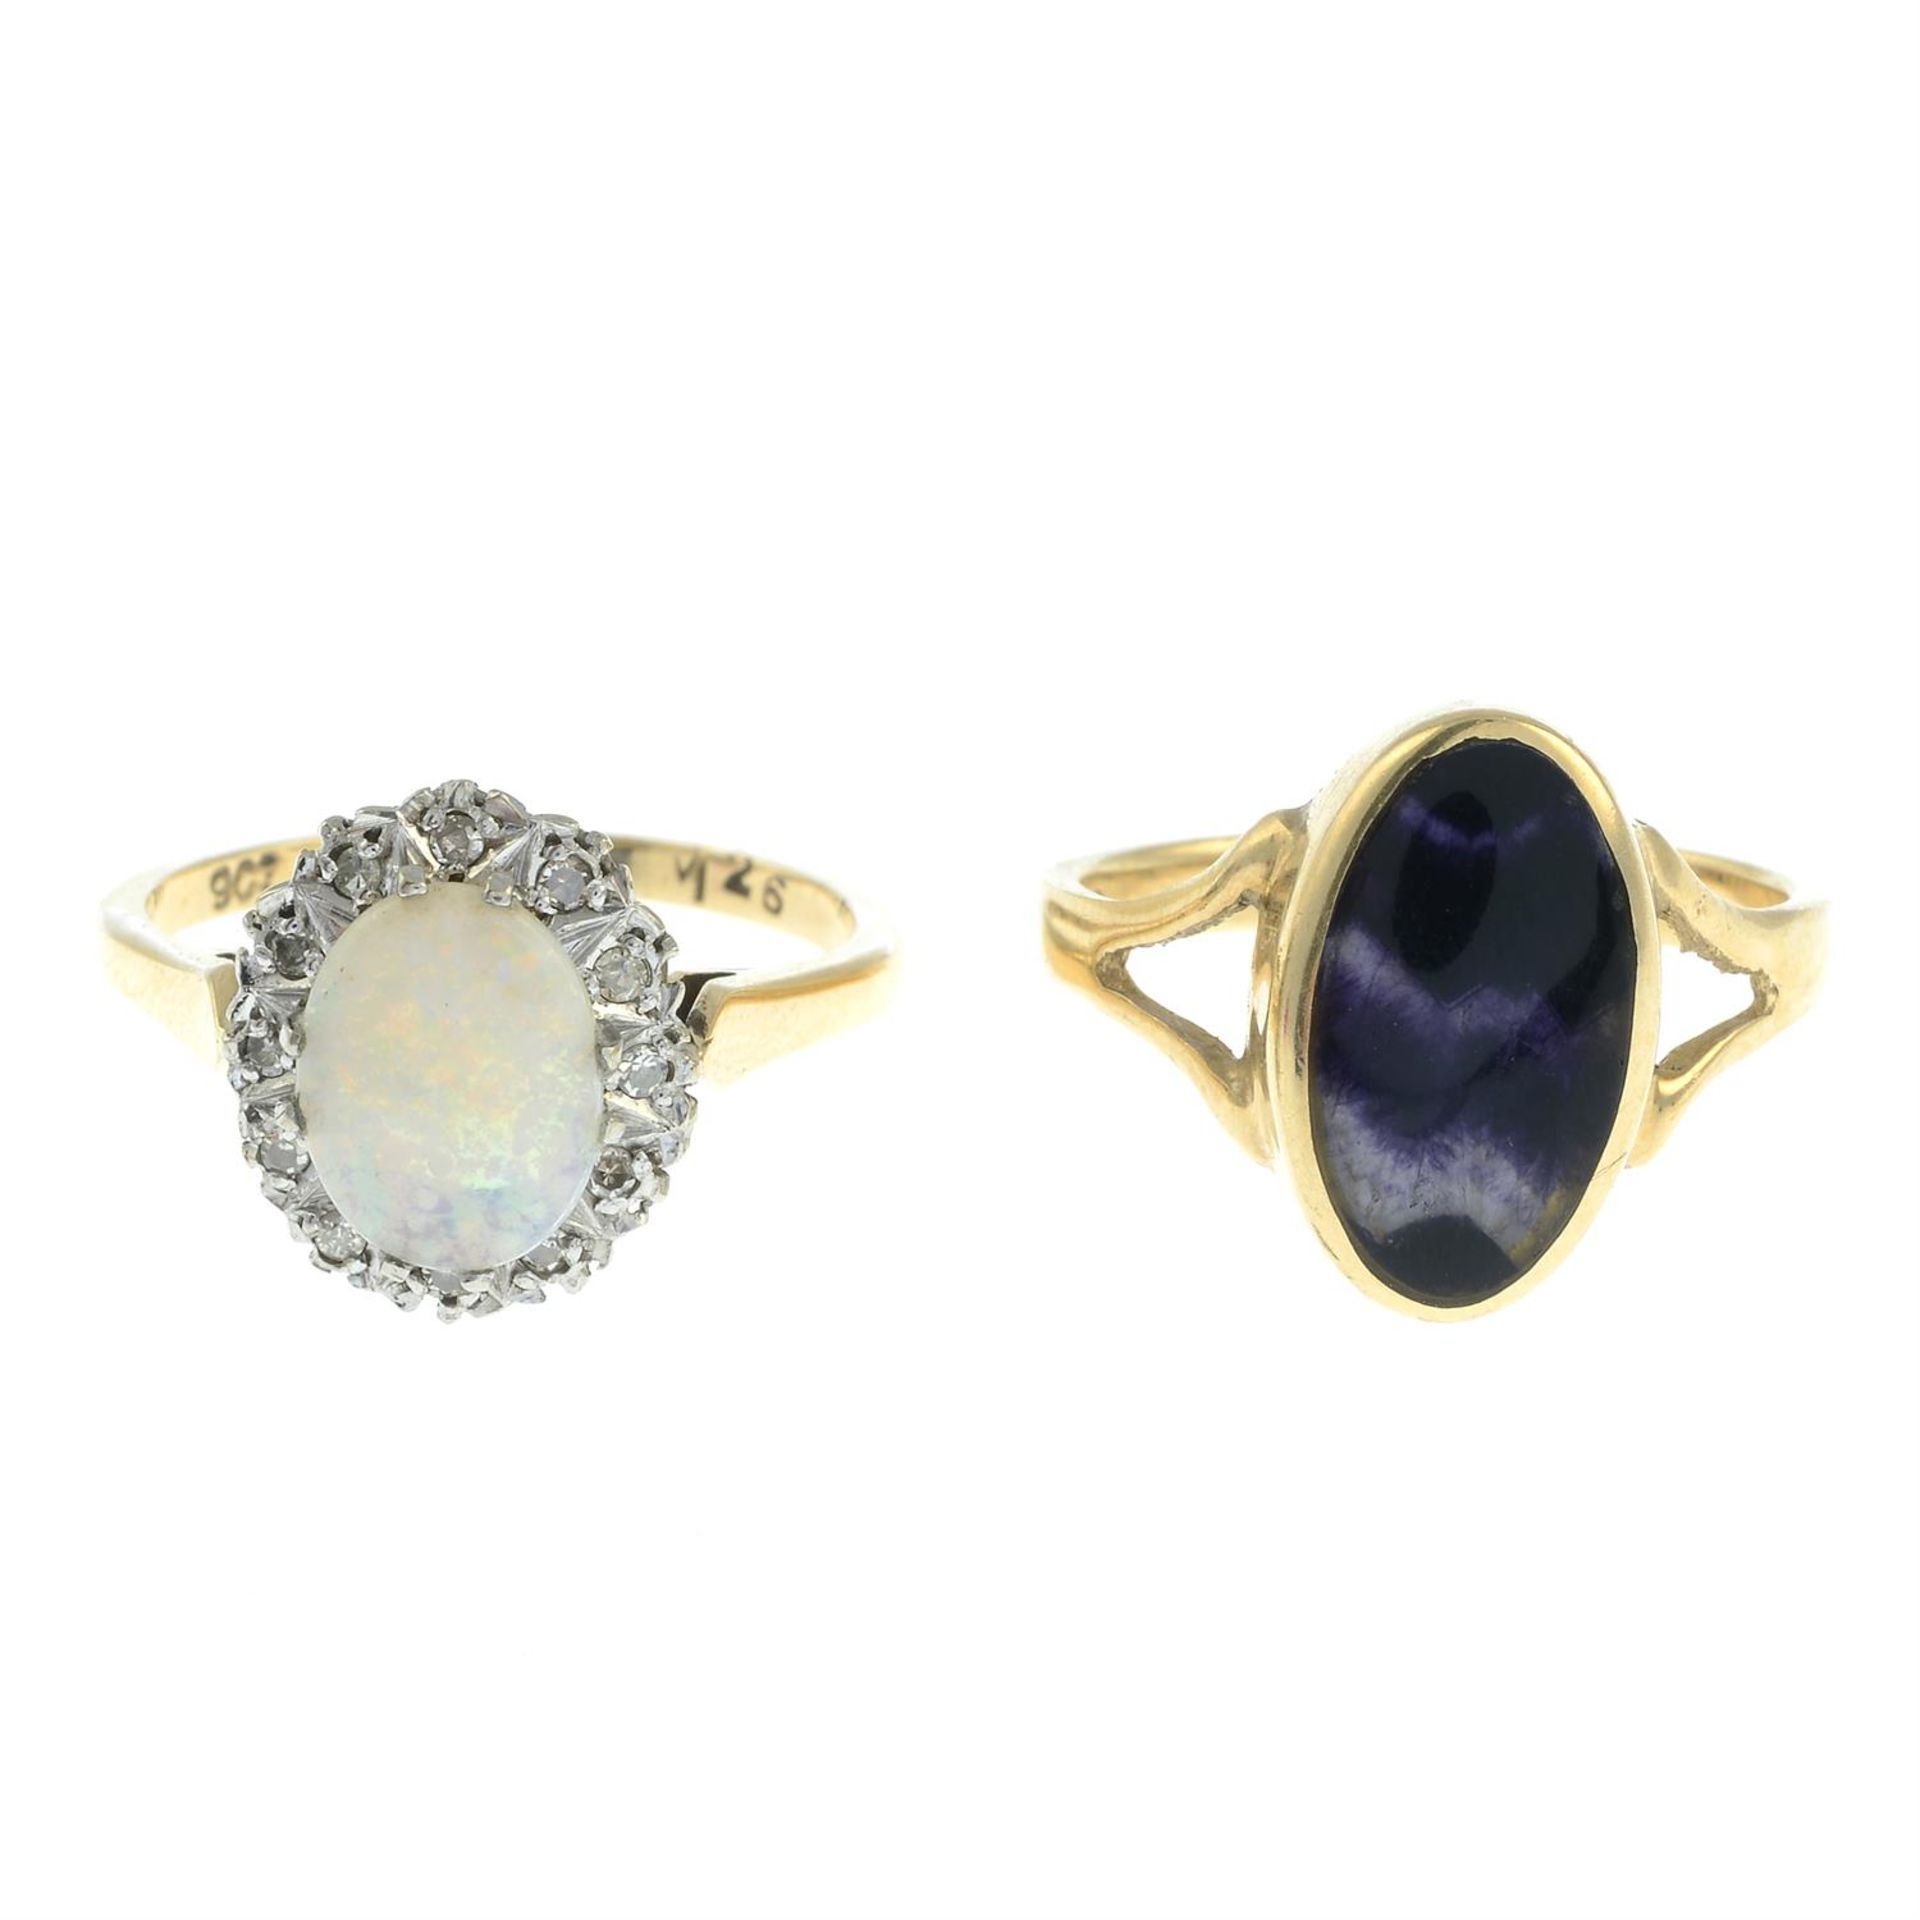 An opal and diamond cluster ring, together with a flourite single-stone ring.